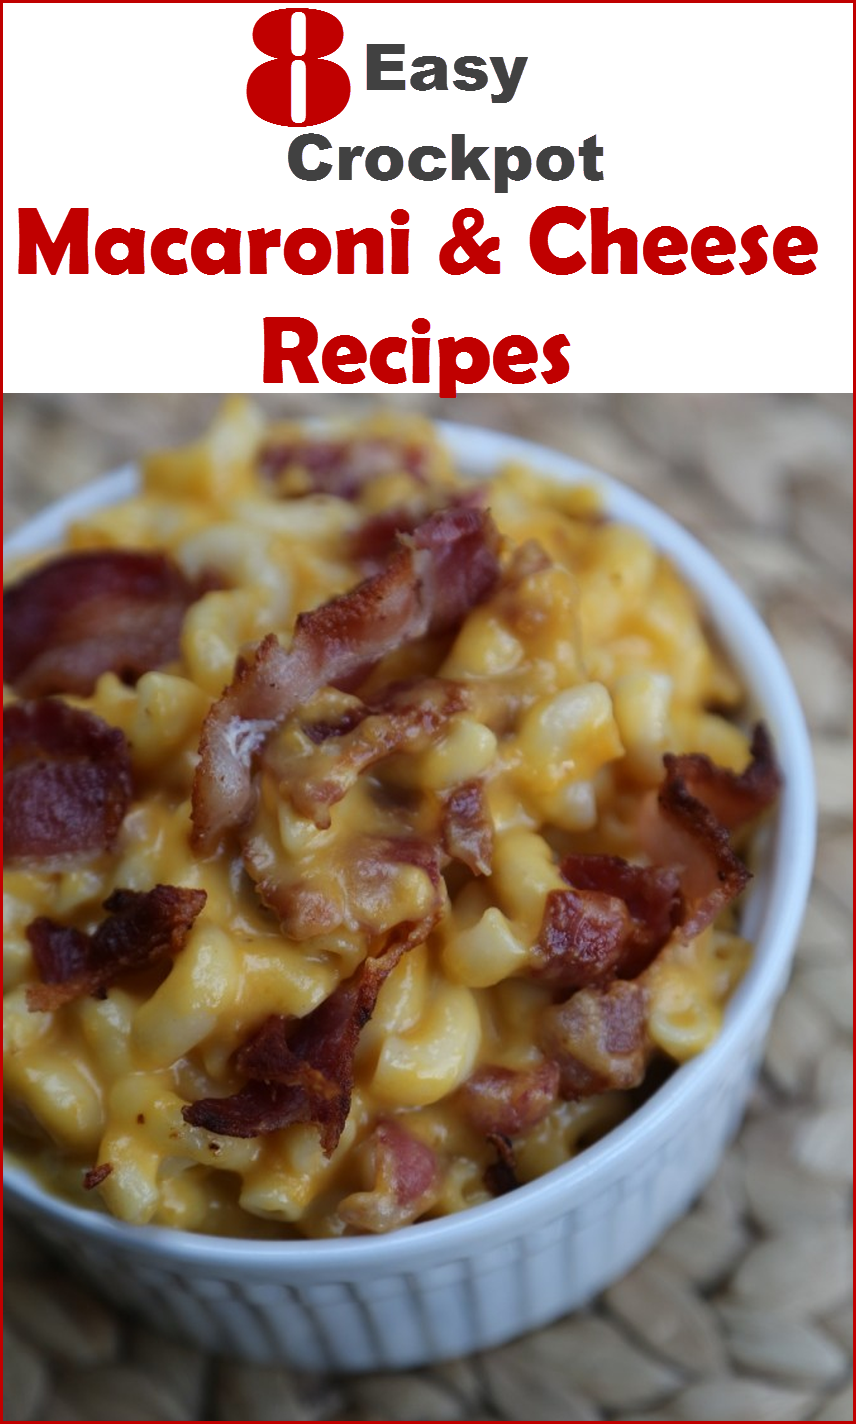 Easy crockpot macaroni and cheese recipes - 8 ways to cook mac and cheese in a slow cooker